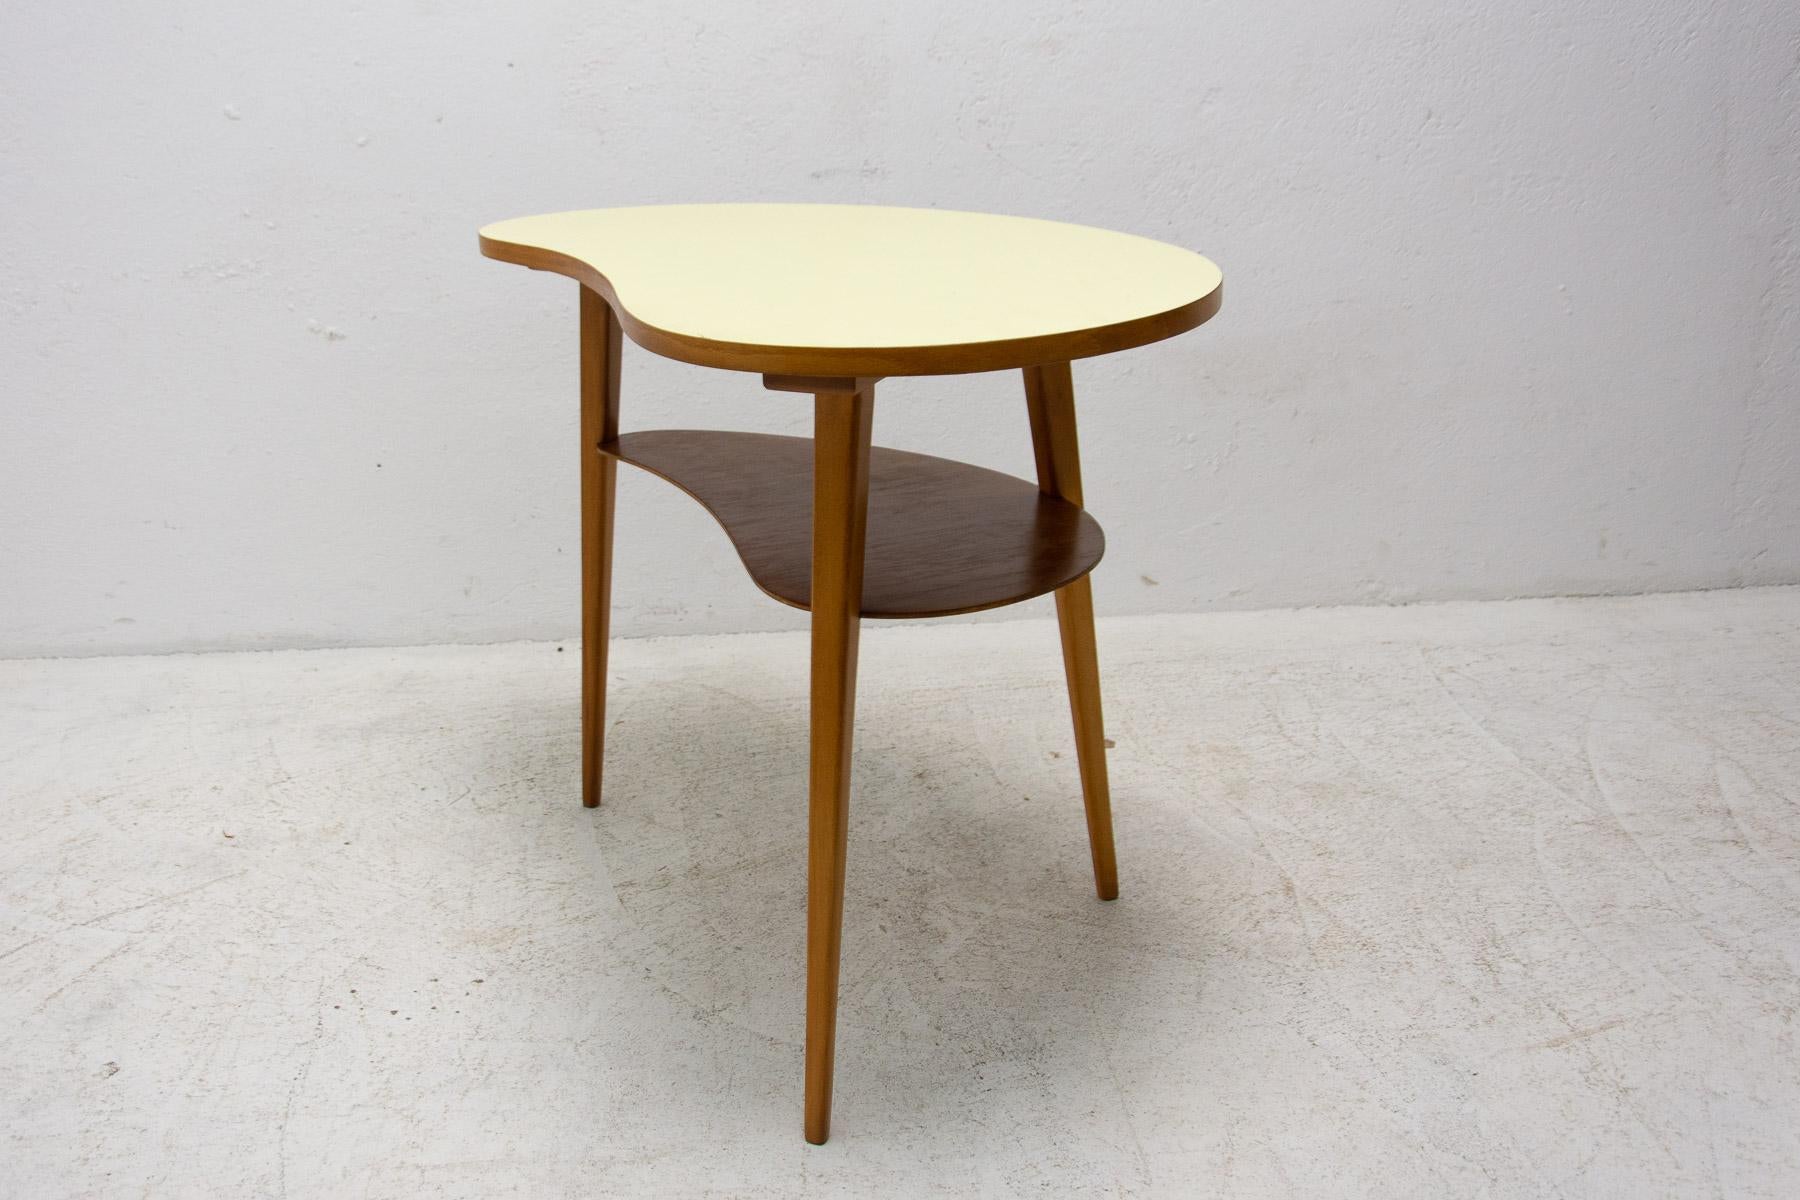 Mid-century kidney table, made of stained beech wood with a formica top, associated with world-renowned exhibition EXPO 58 in Brussels. In good vintage condition, showing slight signs of age and using.

height 66 cm

length 80 cm

width 50 cm.